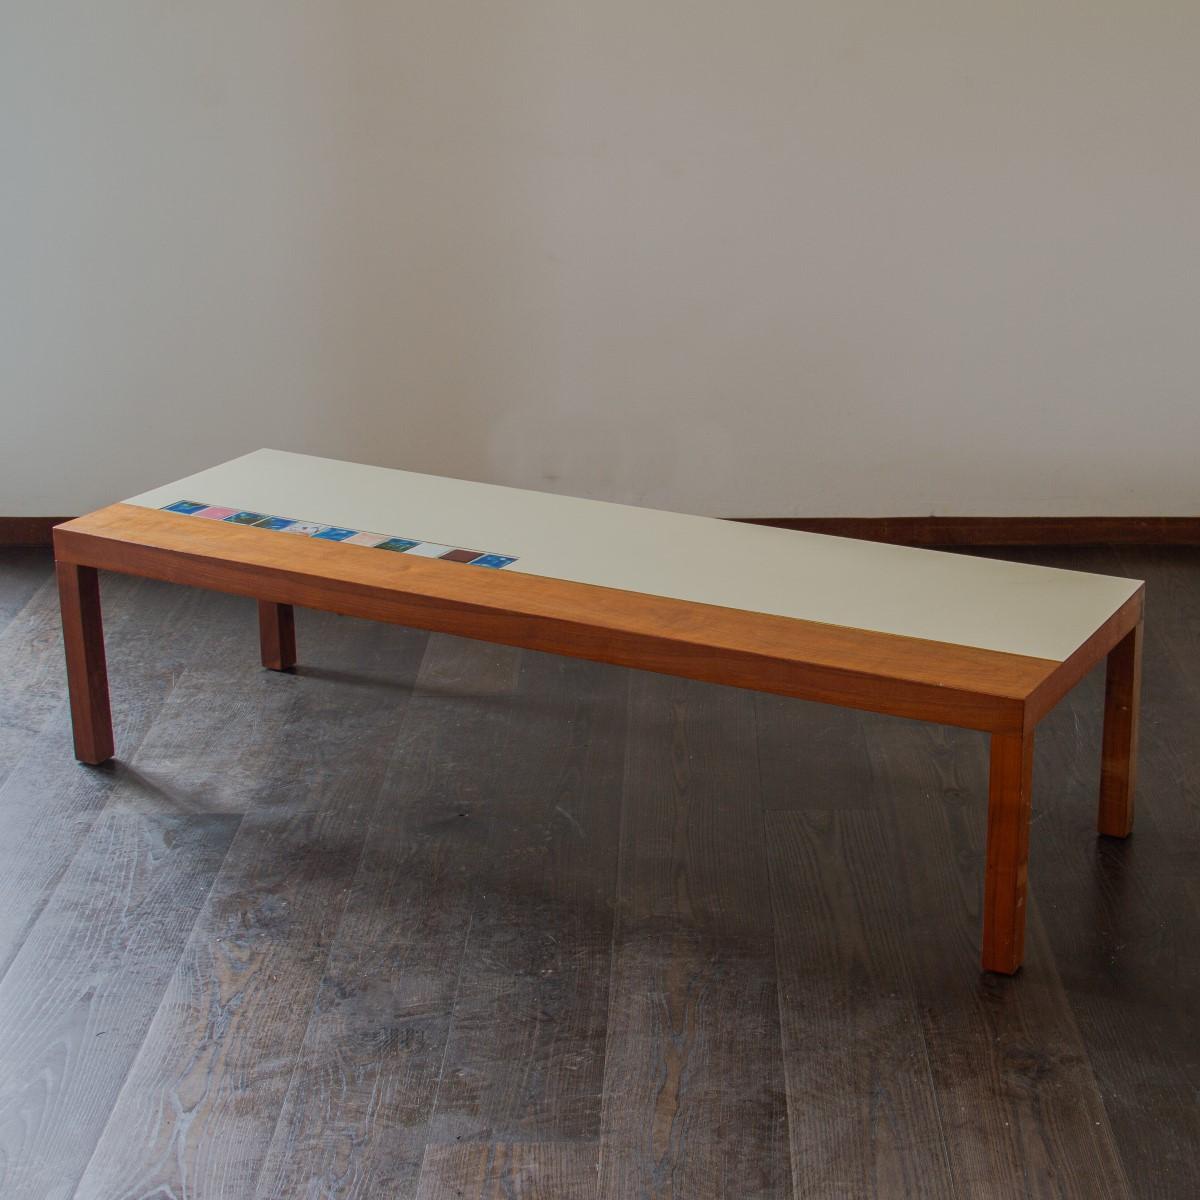 A rectangular wooden coffee table with three quarters of the top being white laminated and inset with colourful enameled tiles. The rest of the top and the legs are stained wood and seperated from the laminate with a brass inset strip. circa 1960s